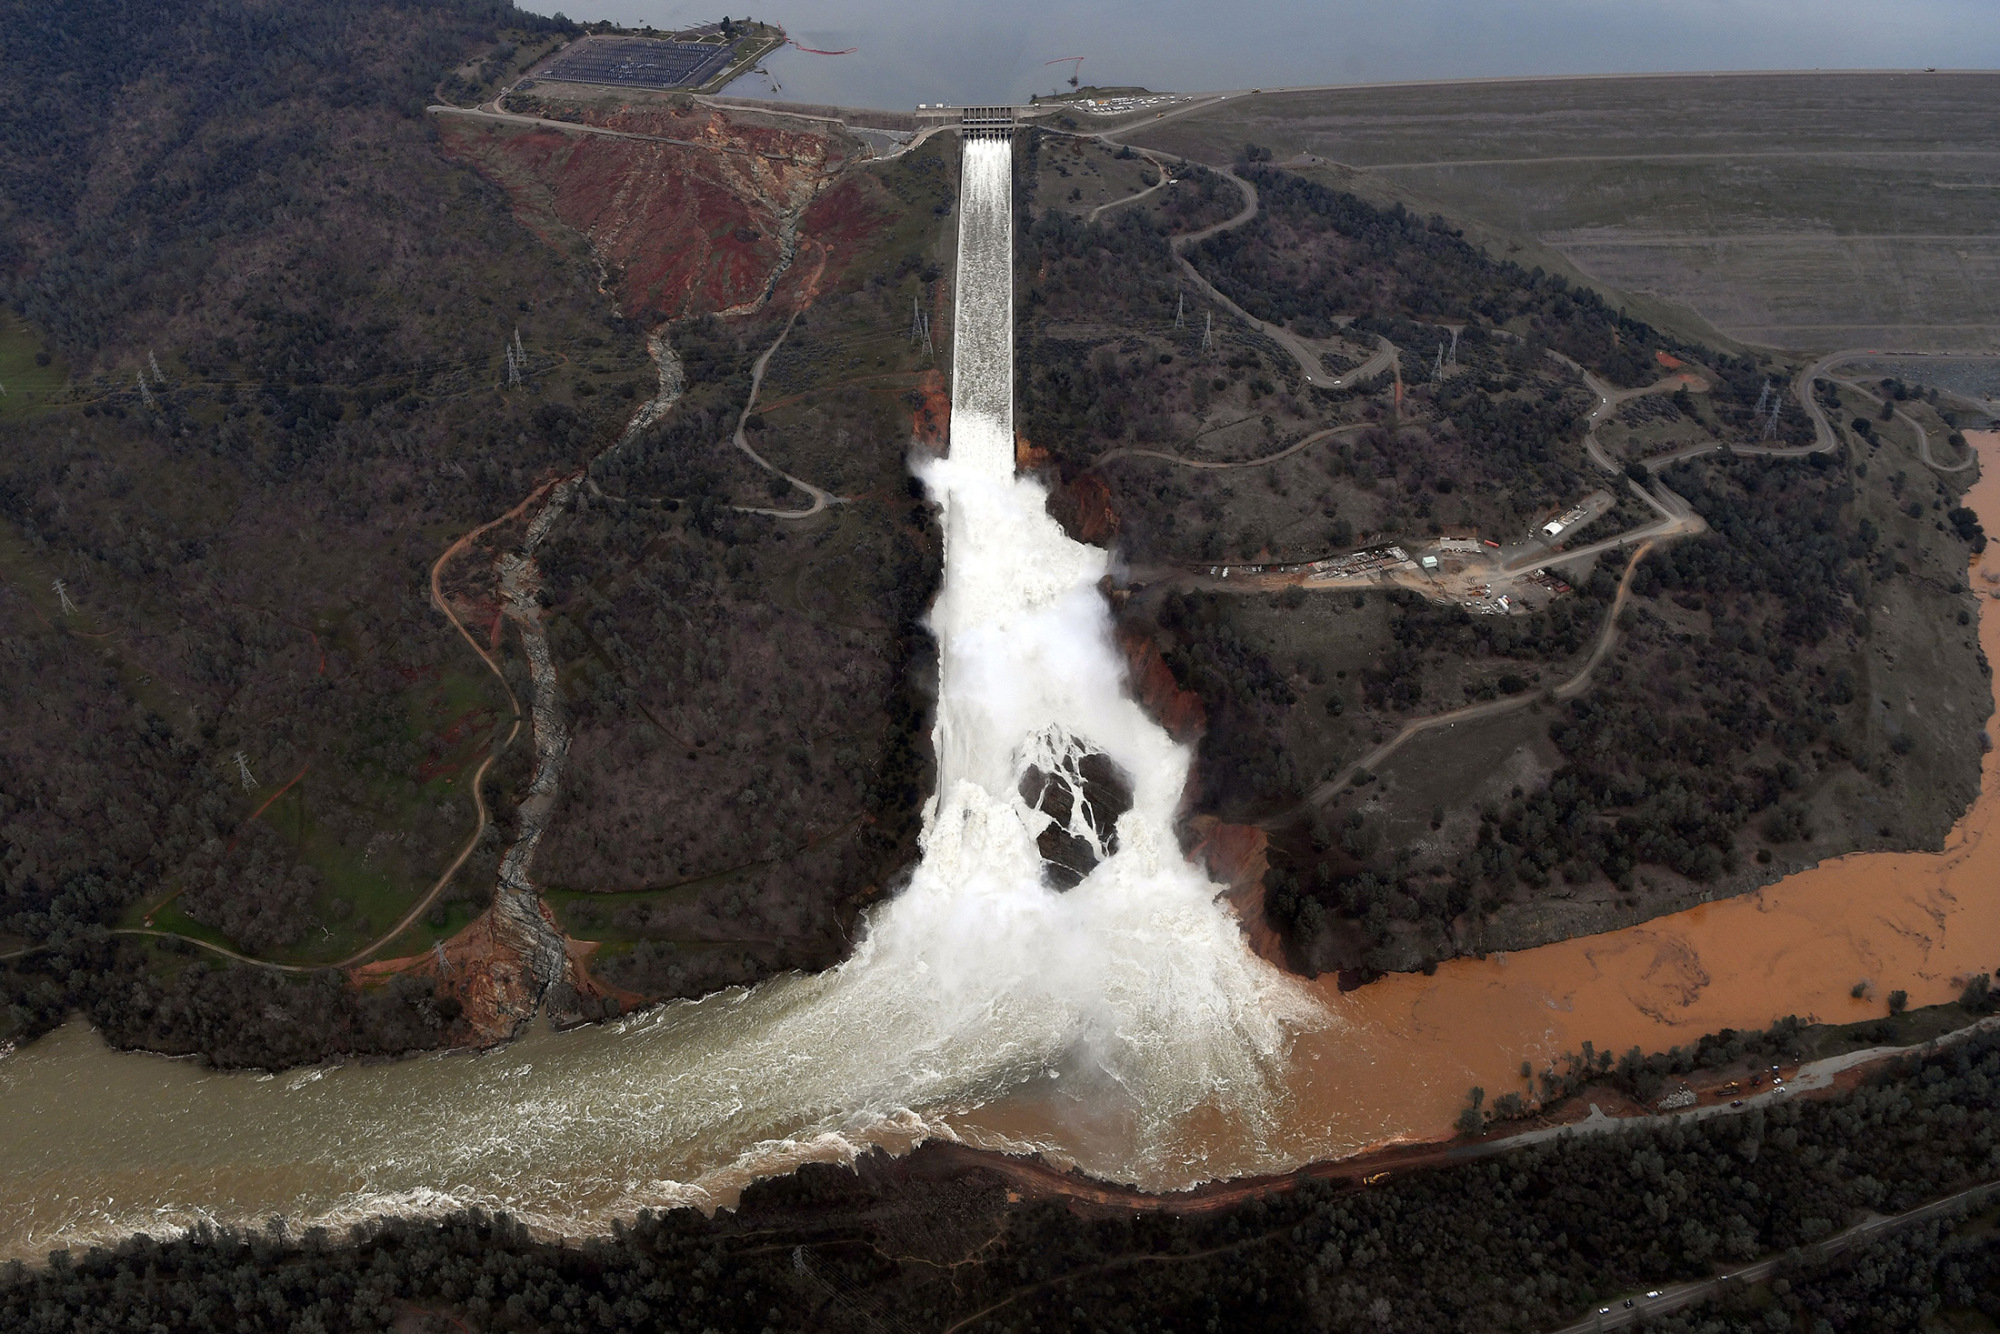 Good Luck Repairing The Badly Damaged Oroville Dam